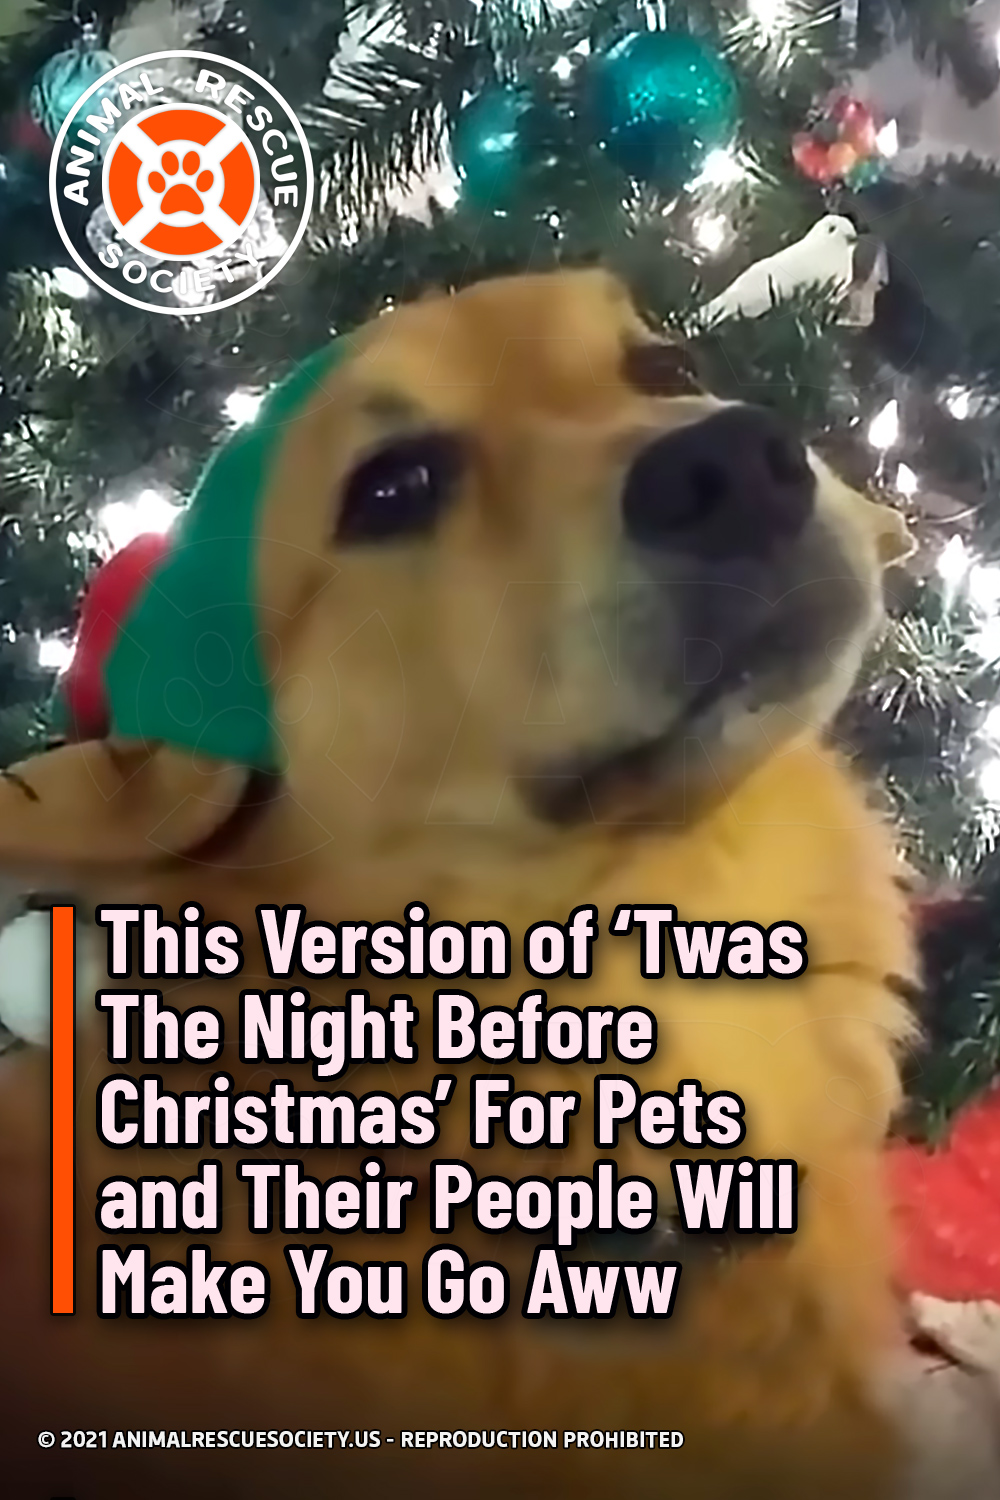 This Version of ‘Twas The Night Before Christmas’ For Pets and Their People Will Make You Go Aww